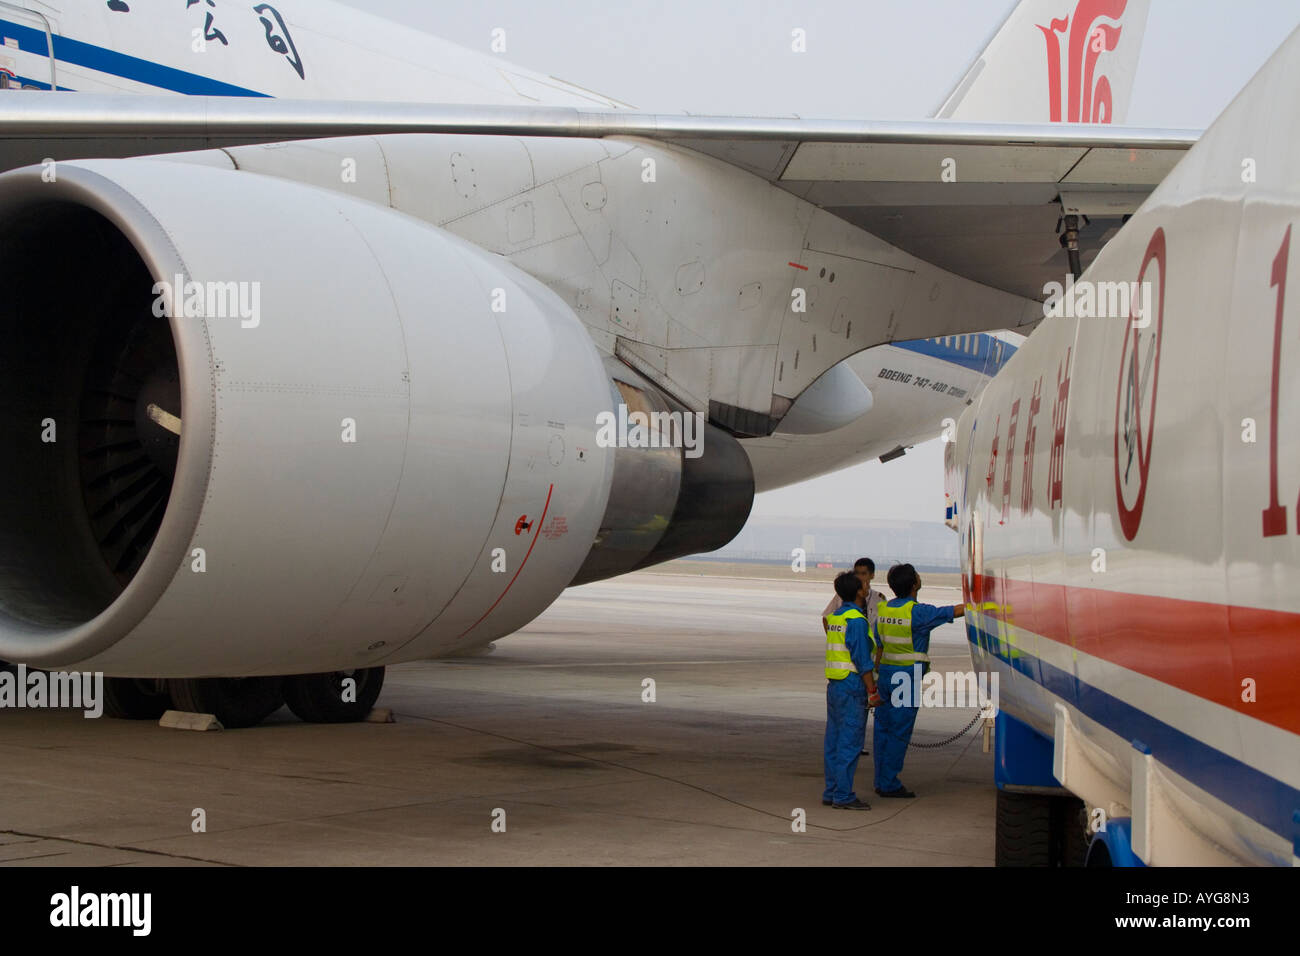 Ground Crew Refueling a China Air Airplane  from a Fuel Truck Capital China International  Airport Beijing China PEK BJS Stock Photo